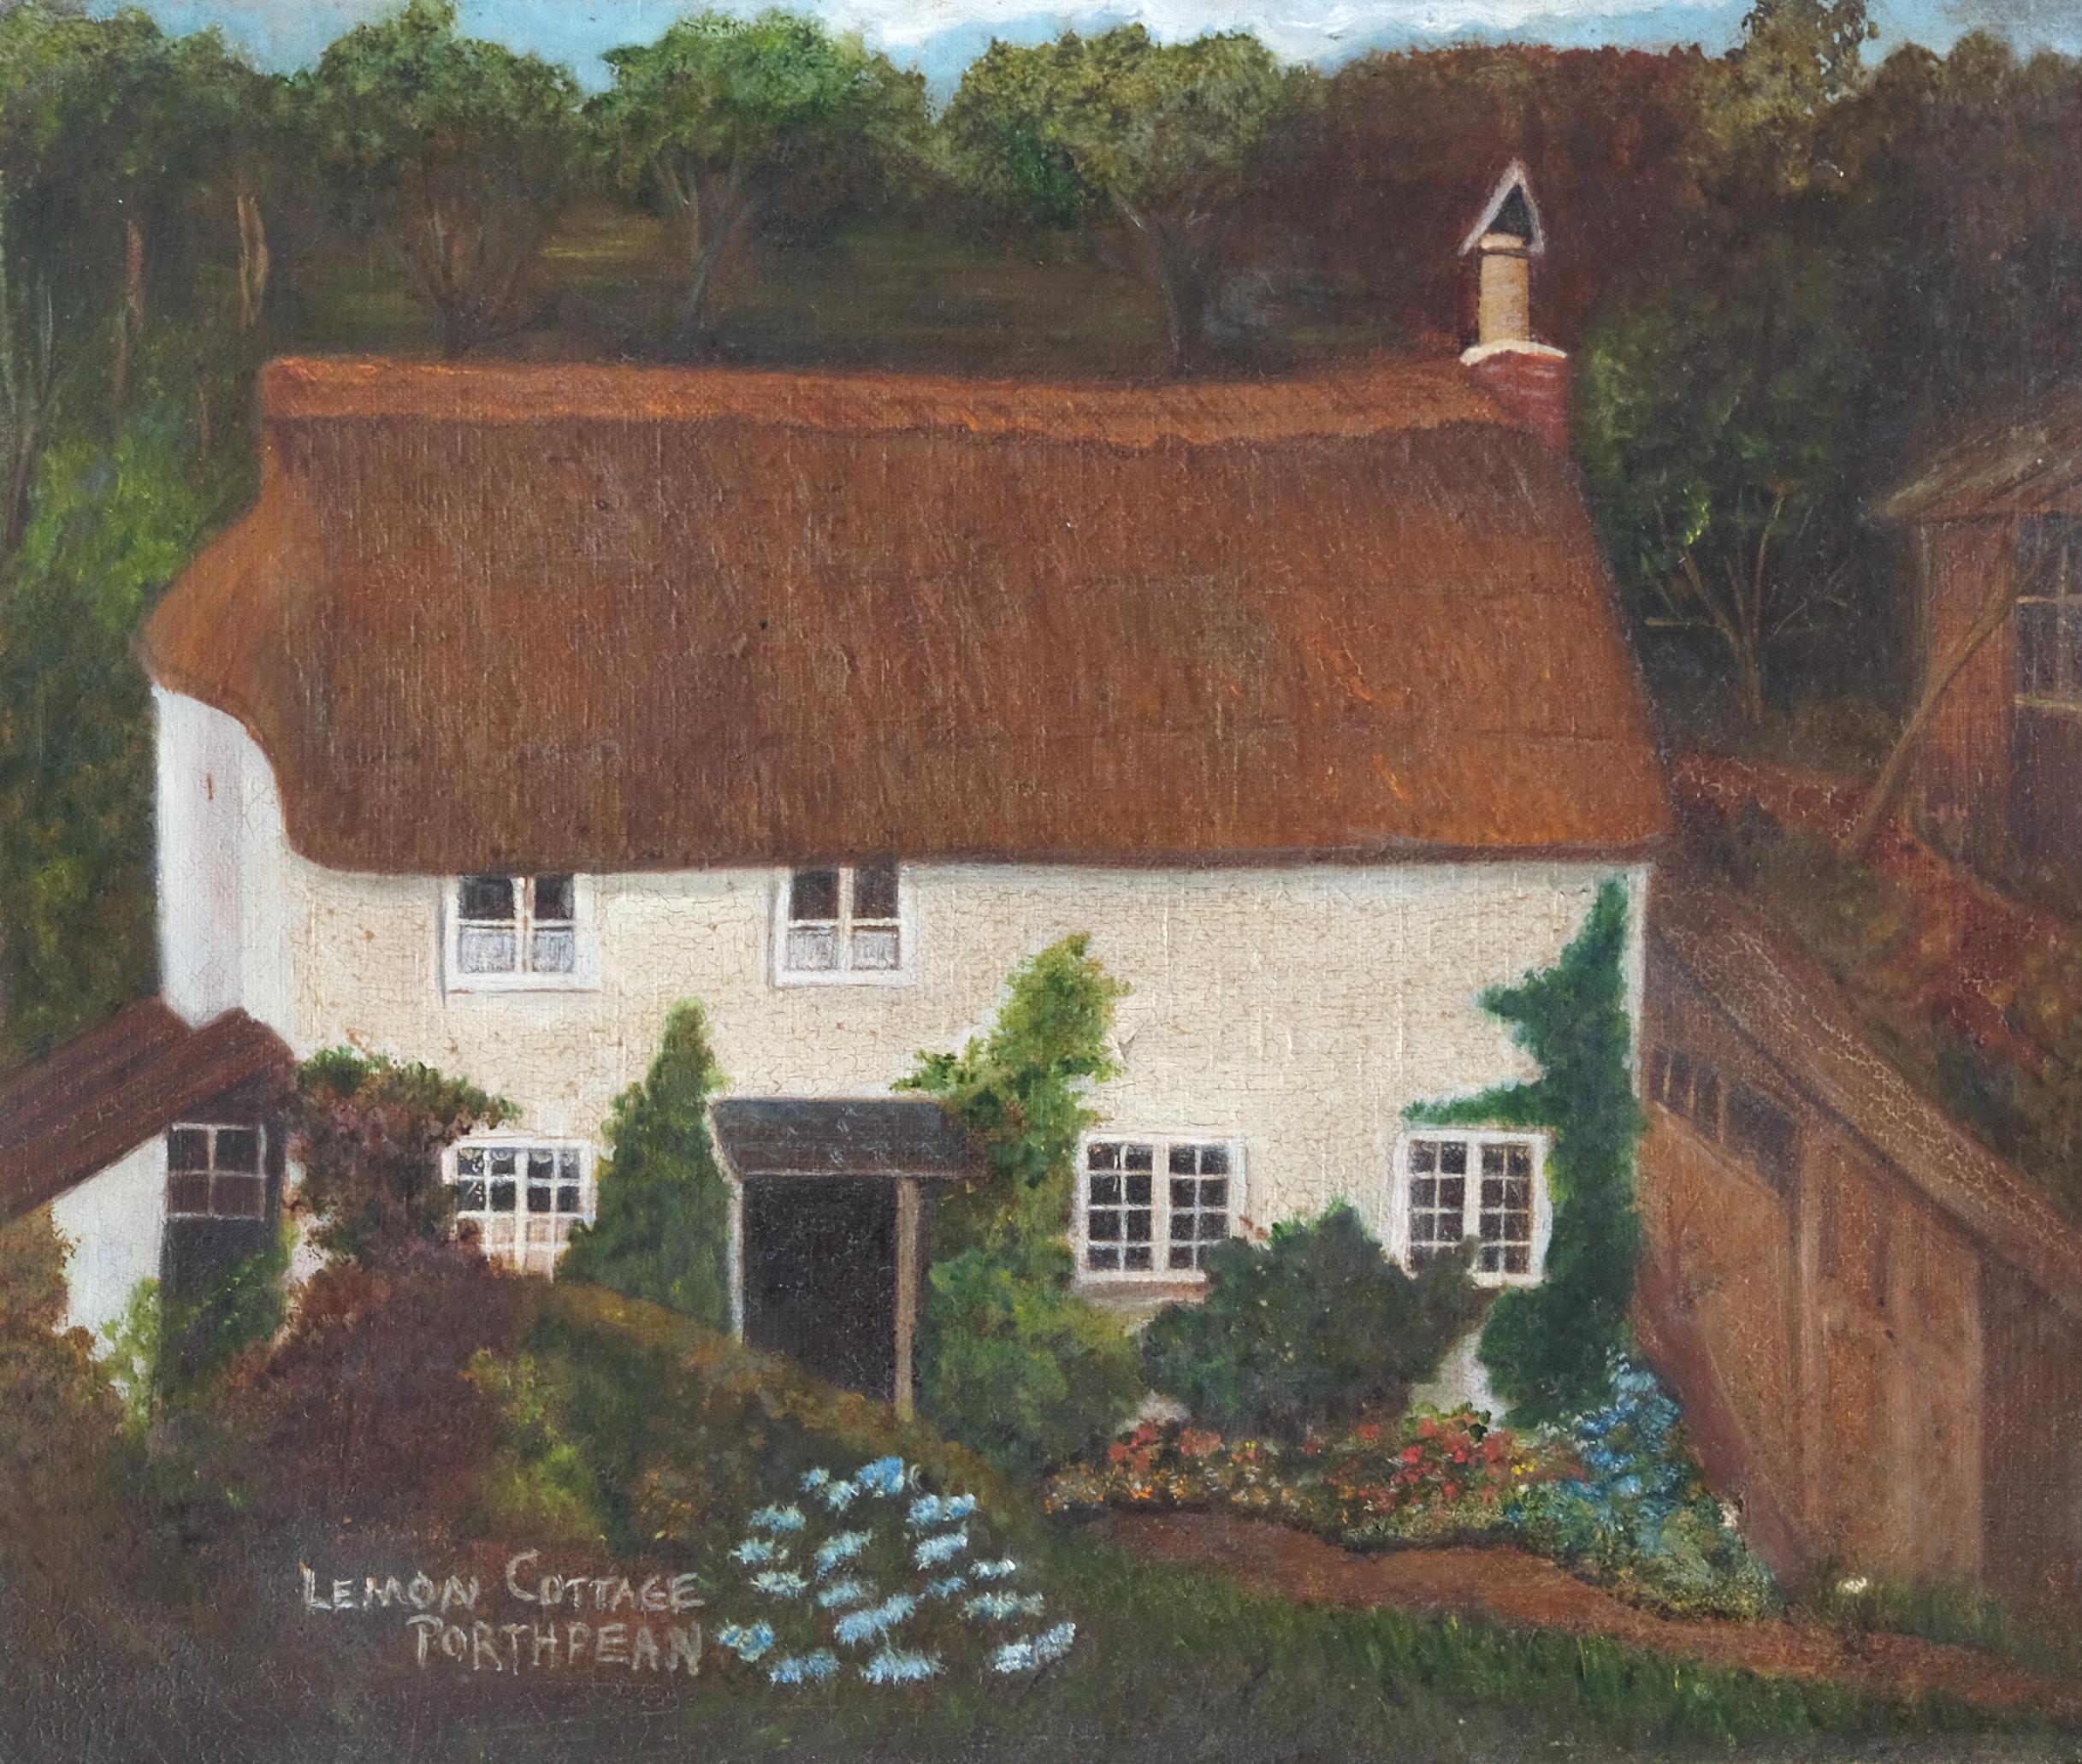 A very cute naive oil painting on stretched canvas of Lemon Cottage, Porthpean in Cornwall. Late 19th-early 20th century. Unframed.
Porthpean is a small village on the cliffs of the southern Cornish coast, South West England.
A charming piece of